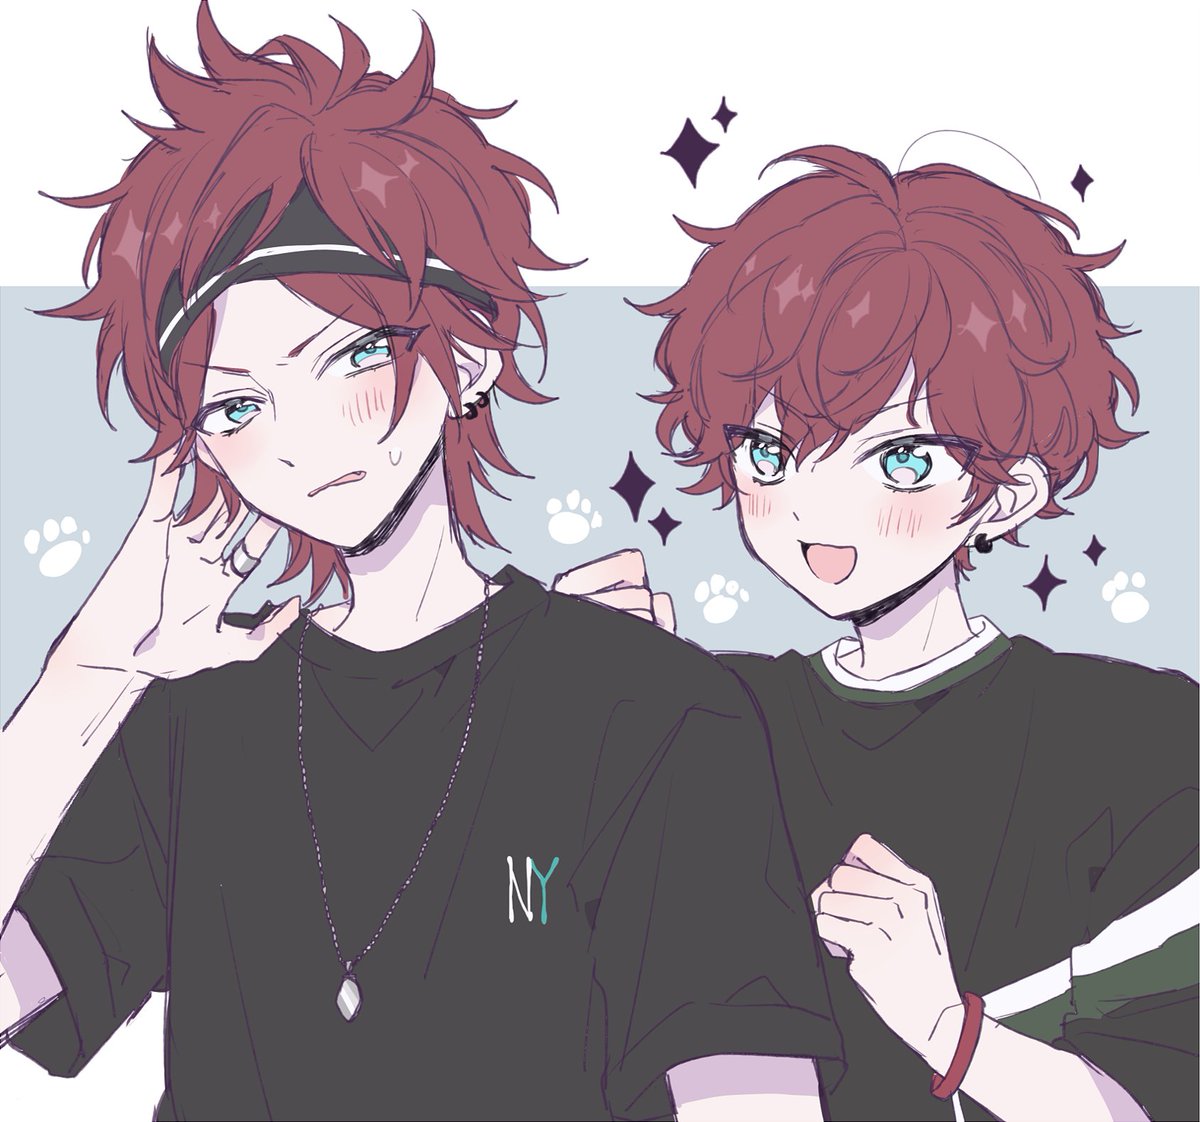 2boys multiple boys male focus jewelry shirt red hair brothers  illustration images